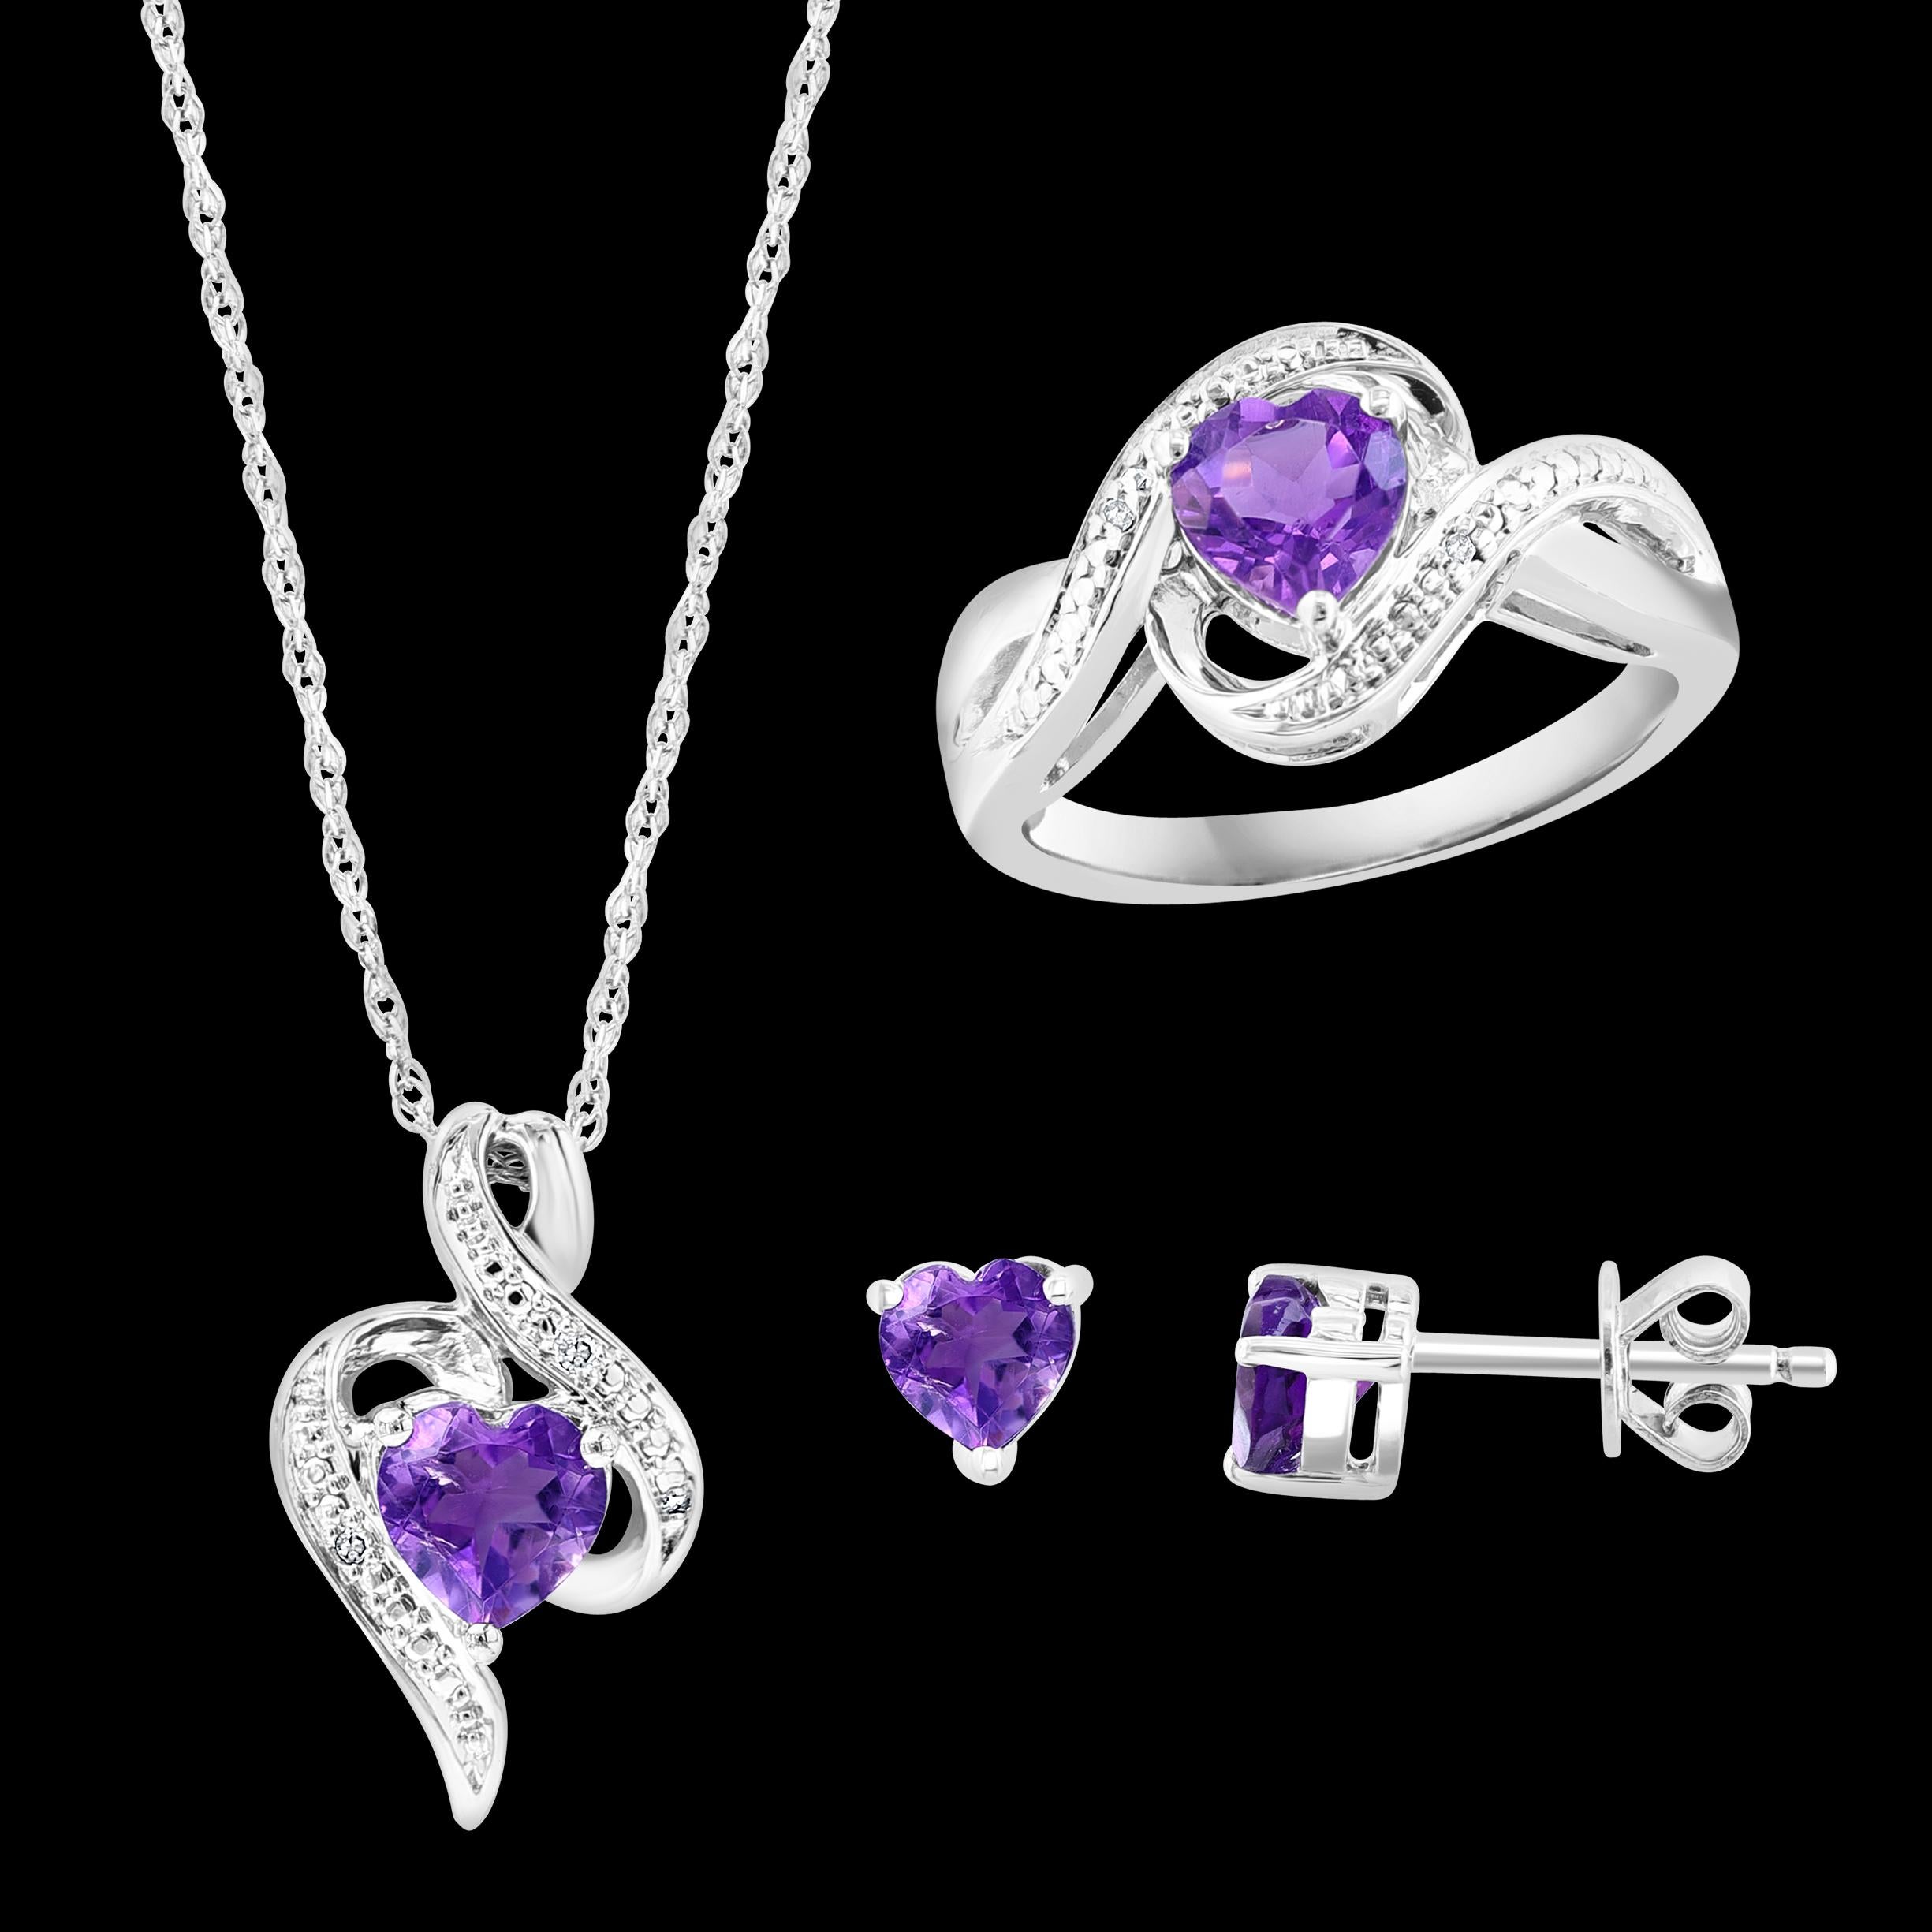 Women's Sterling Silver & Natural Amethyst Suite Ring , Earring & Pendant with Chain For Sale